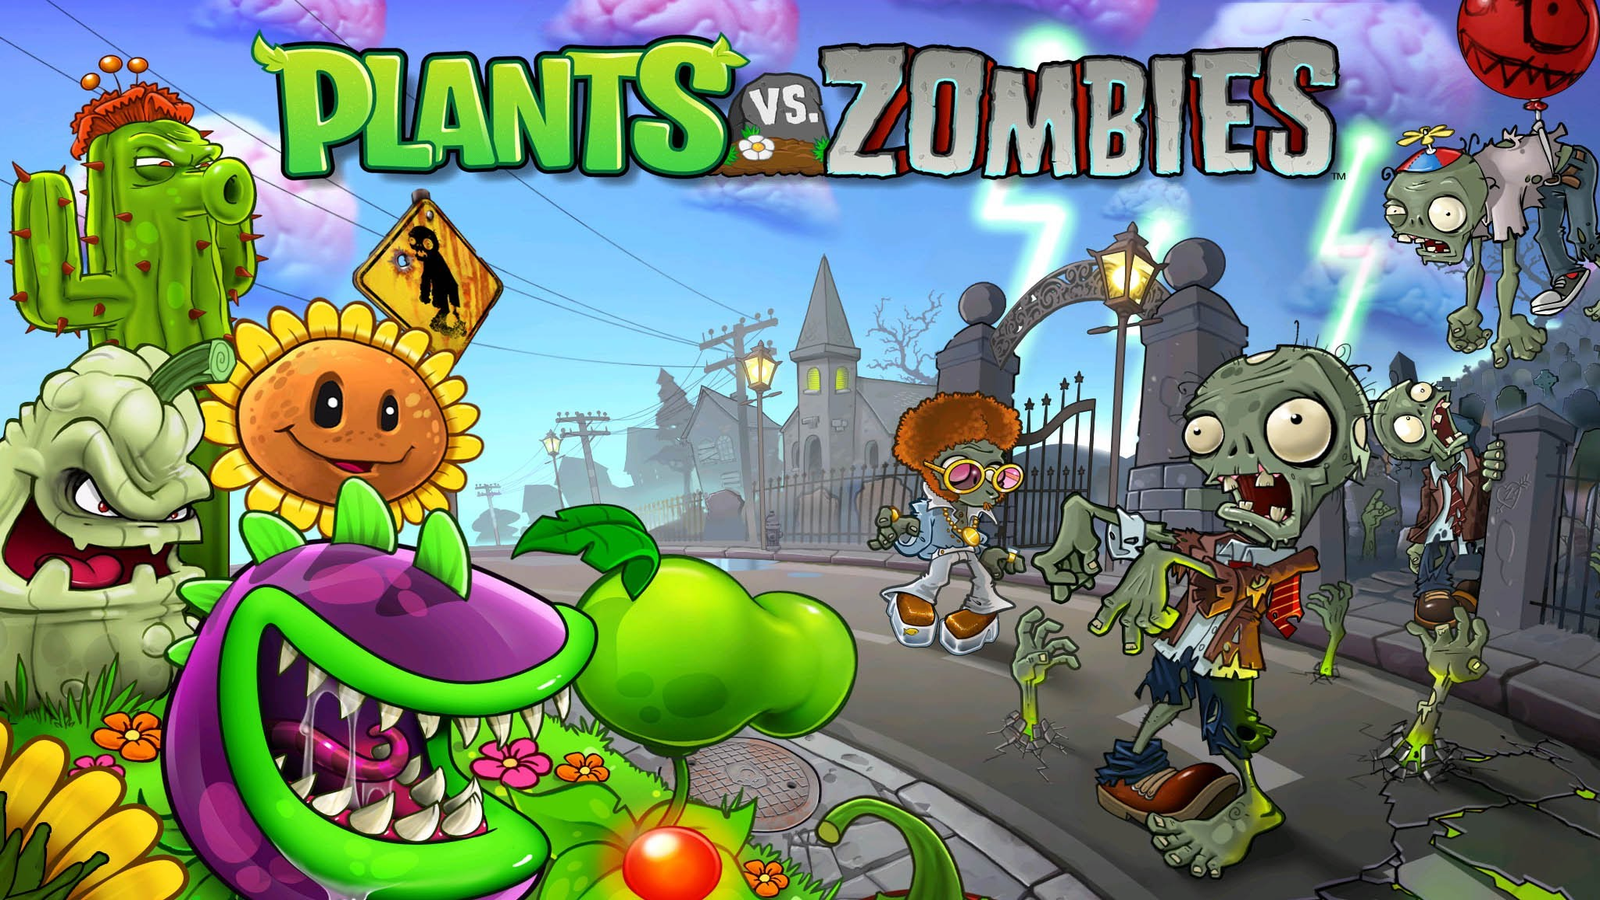 Plants Vs Zombies Game Download Free for PC [Game of the Year] - Rihno  Games